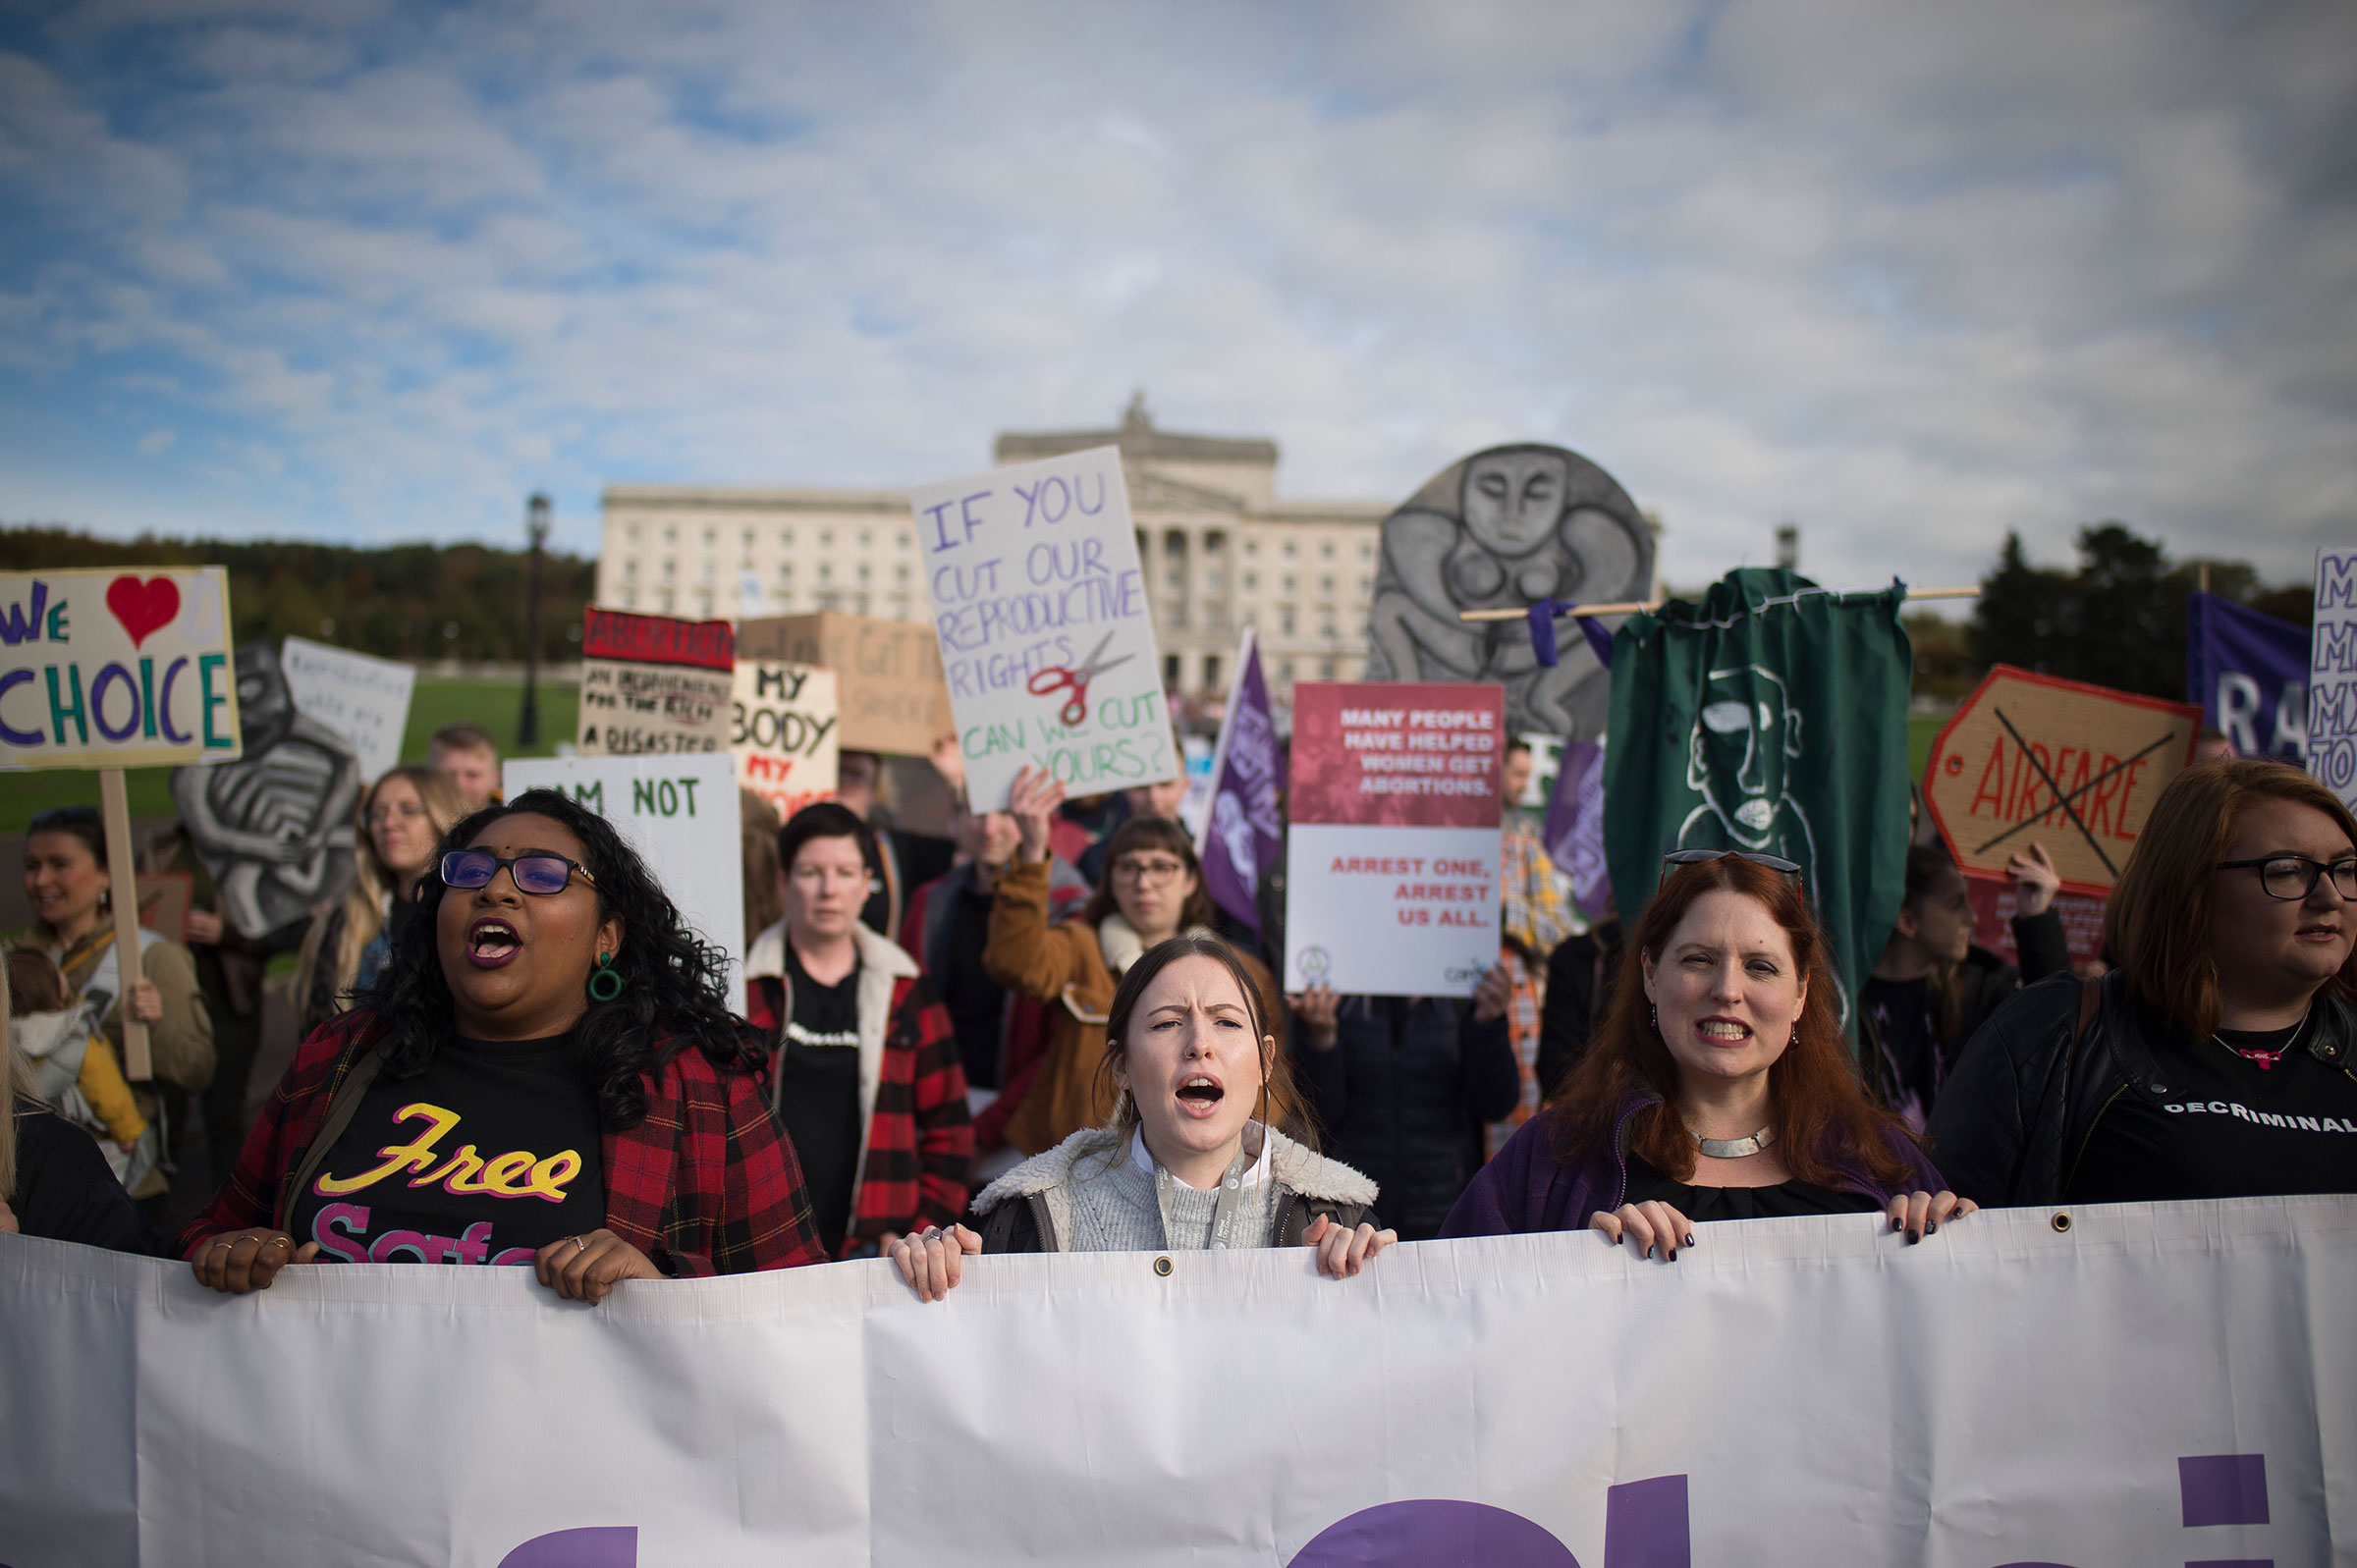 Northern Ireland Women Still Struggle to Access Abortion Time pic